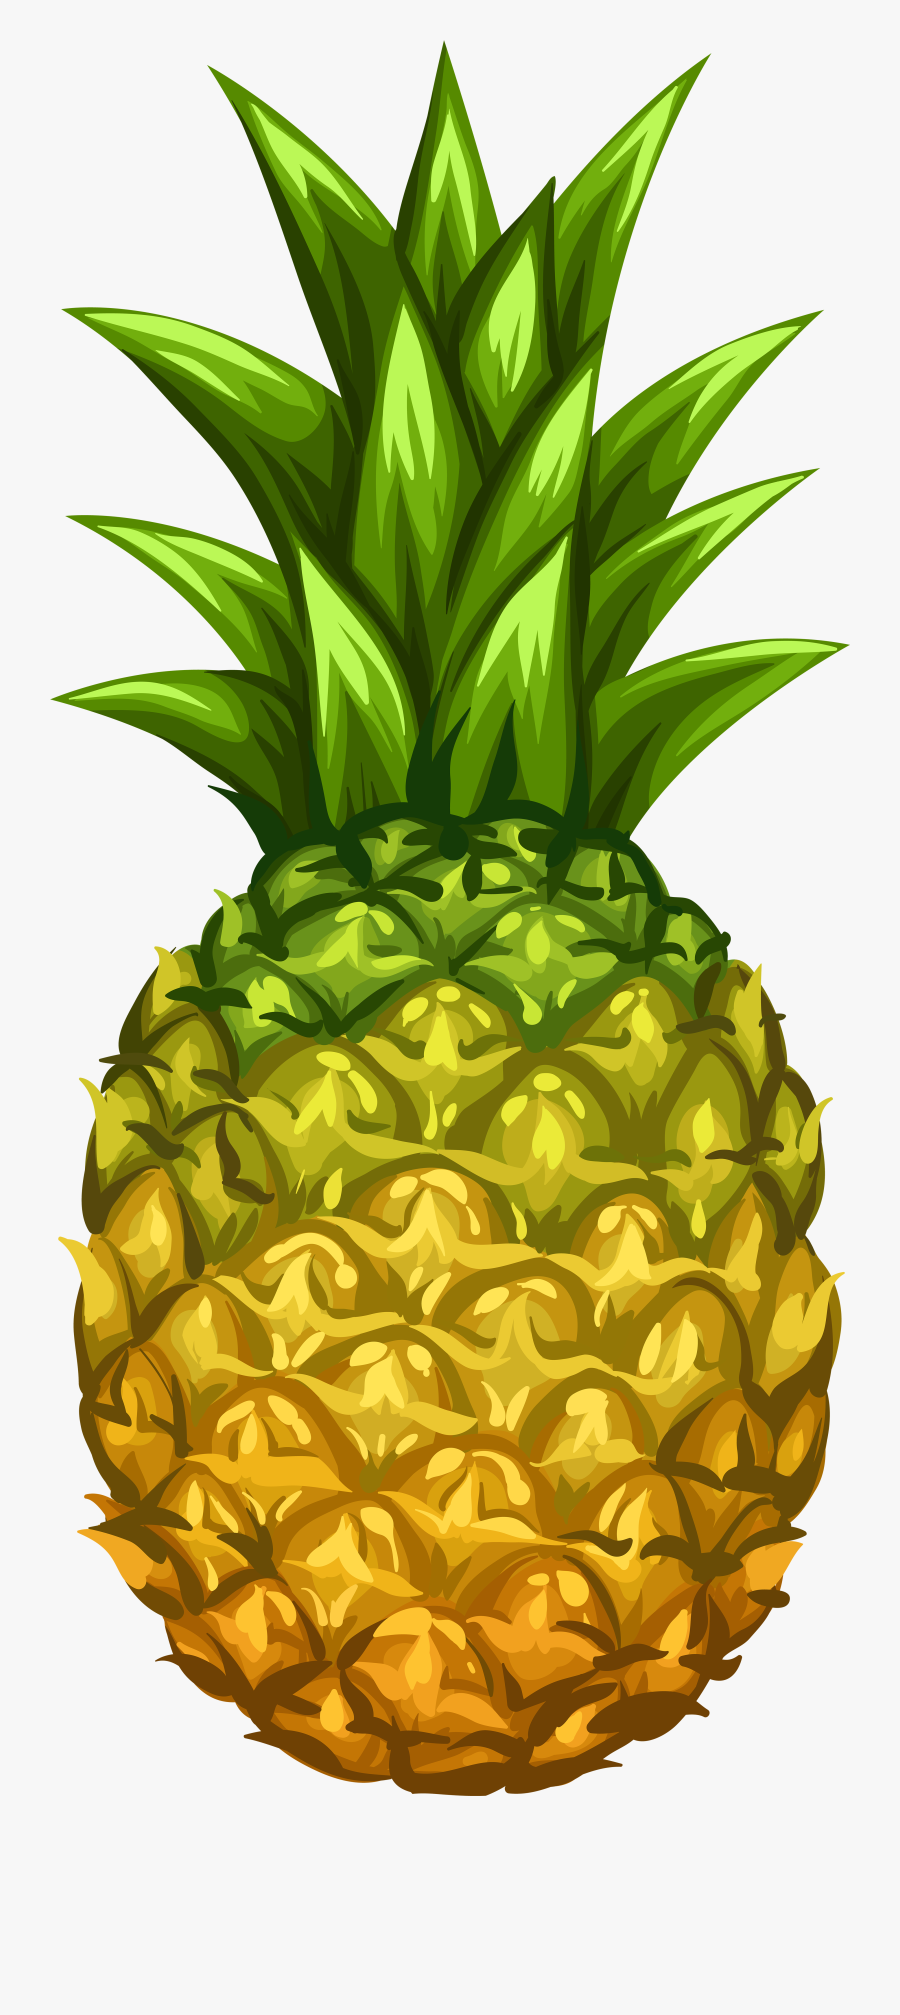 Png Of A Pineapple - Retro Pineapple, Transparent Clipart